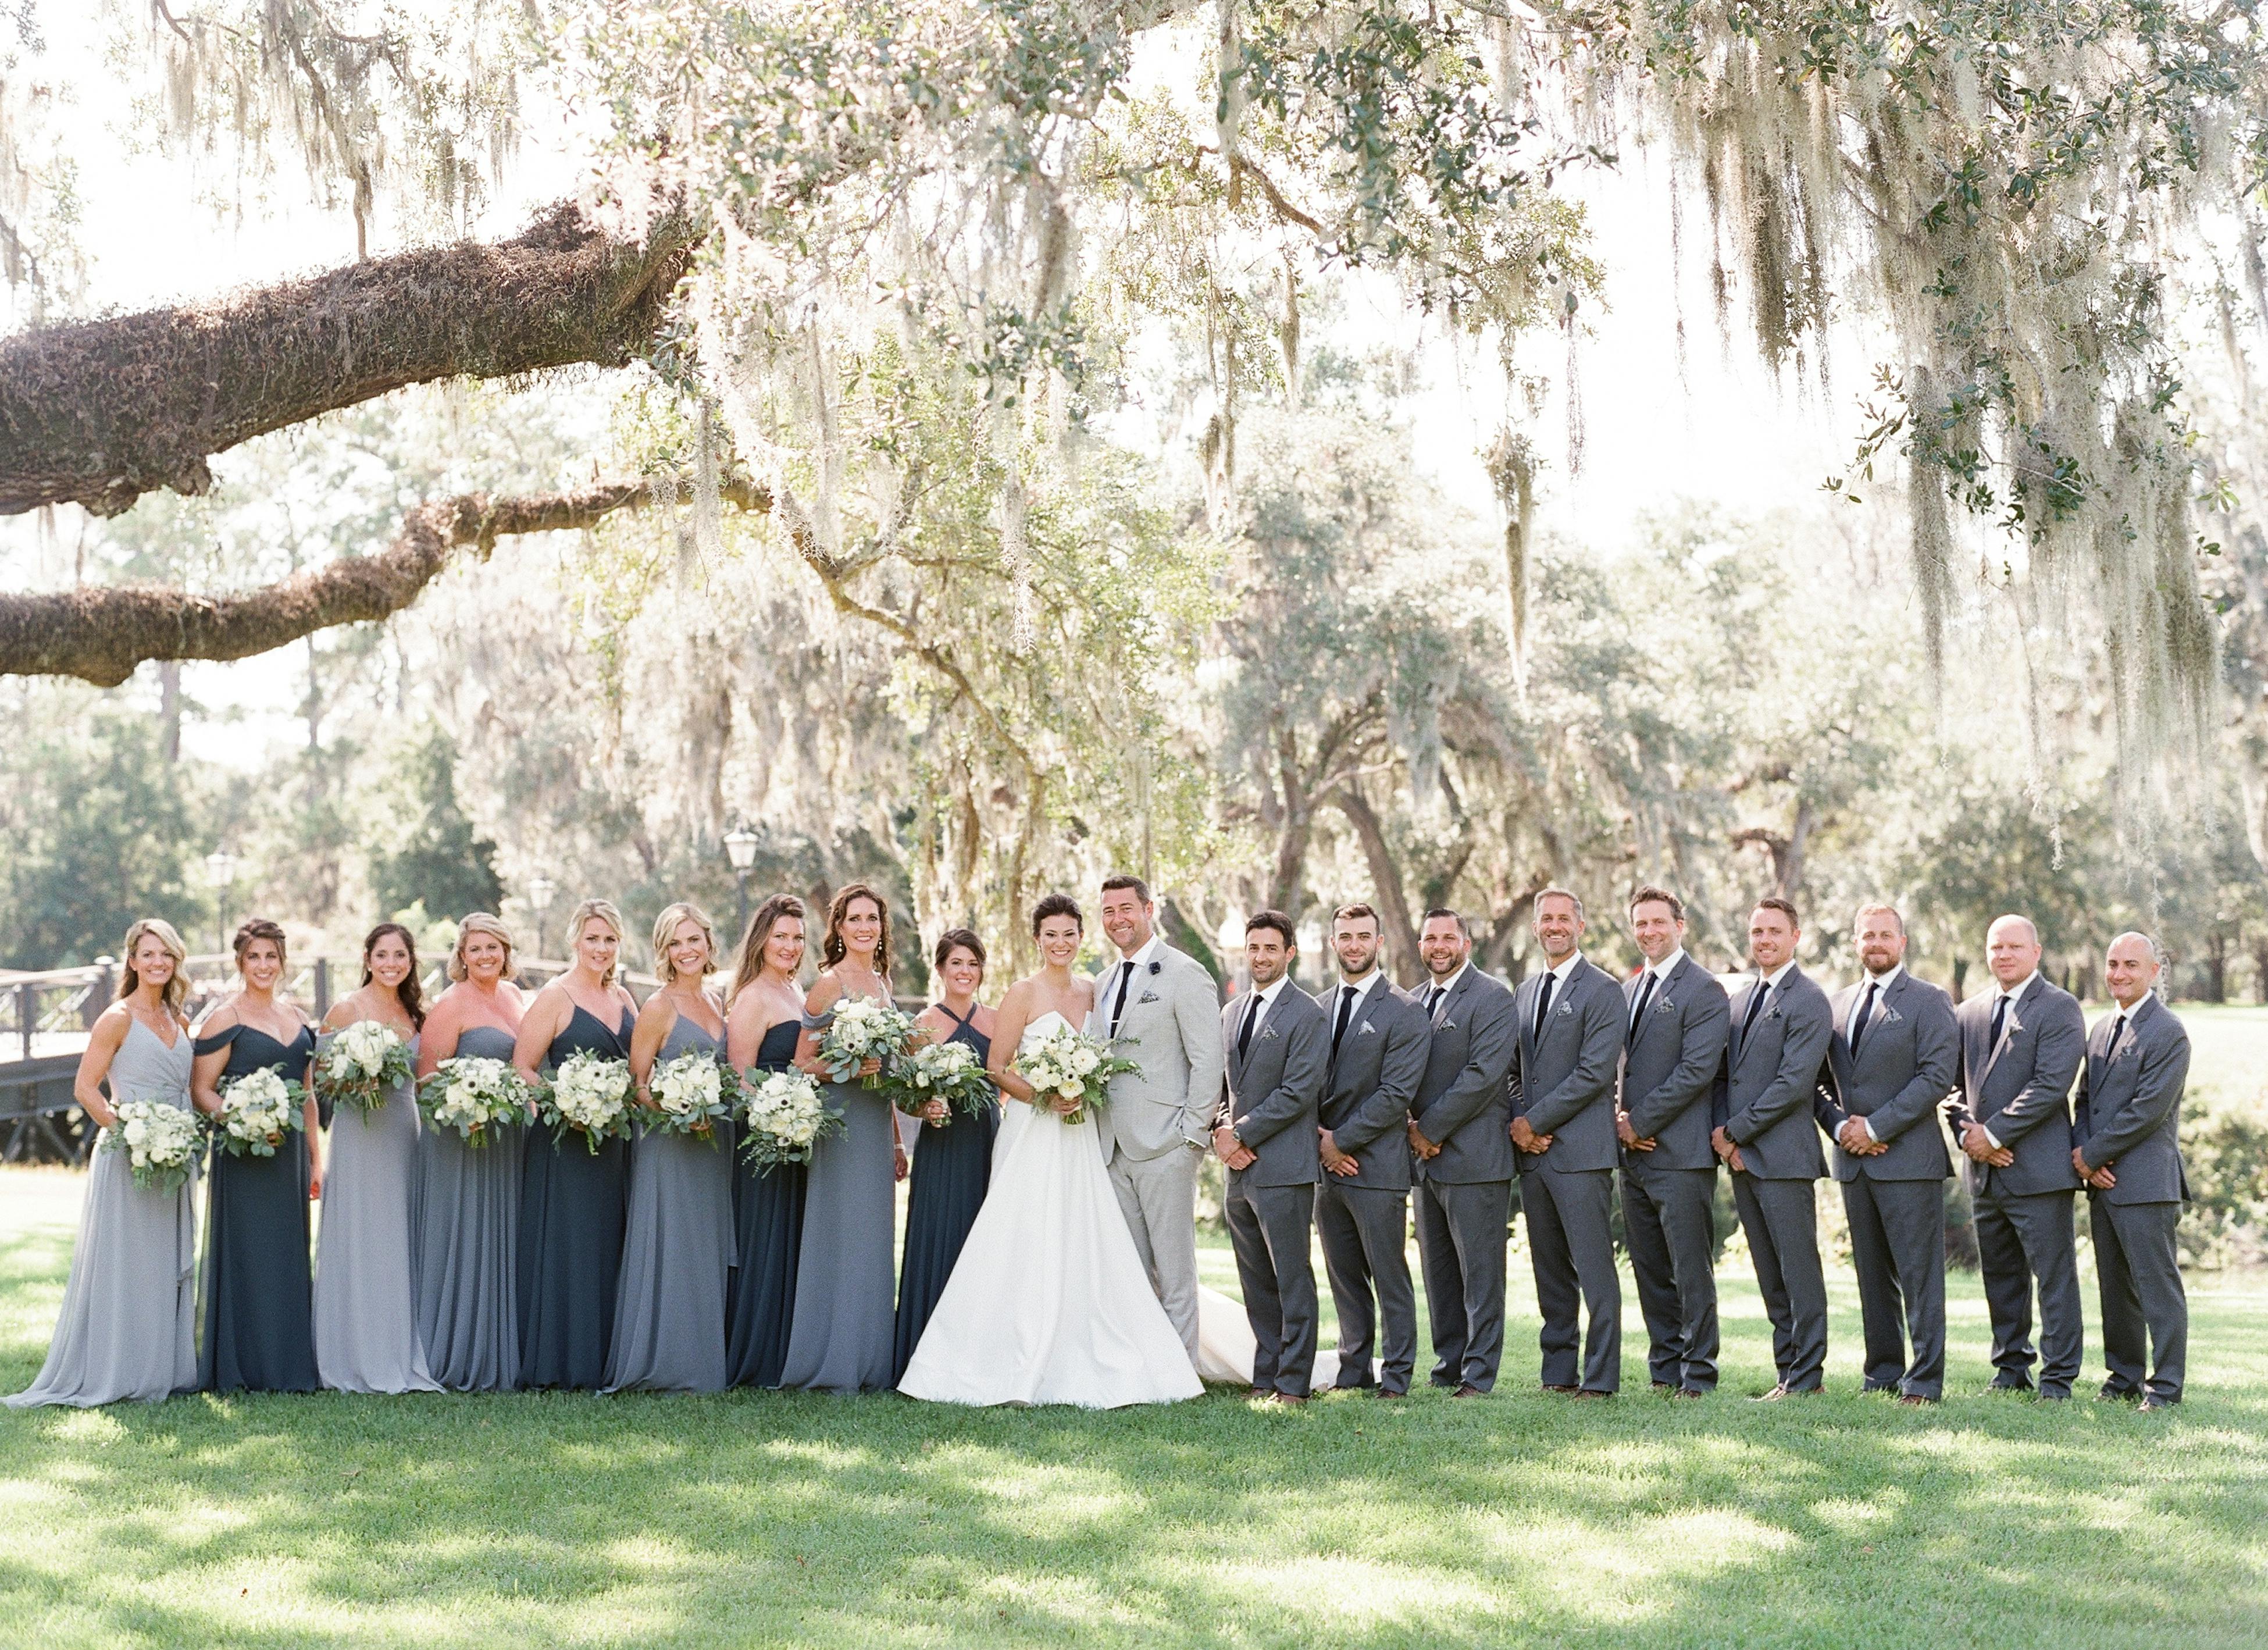 Country Chic Outdoor Wedding at Moreland Landing, Palmetto Bluff in